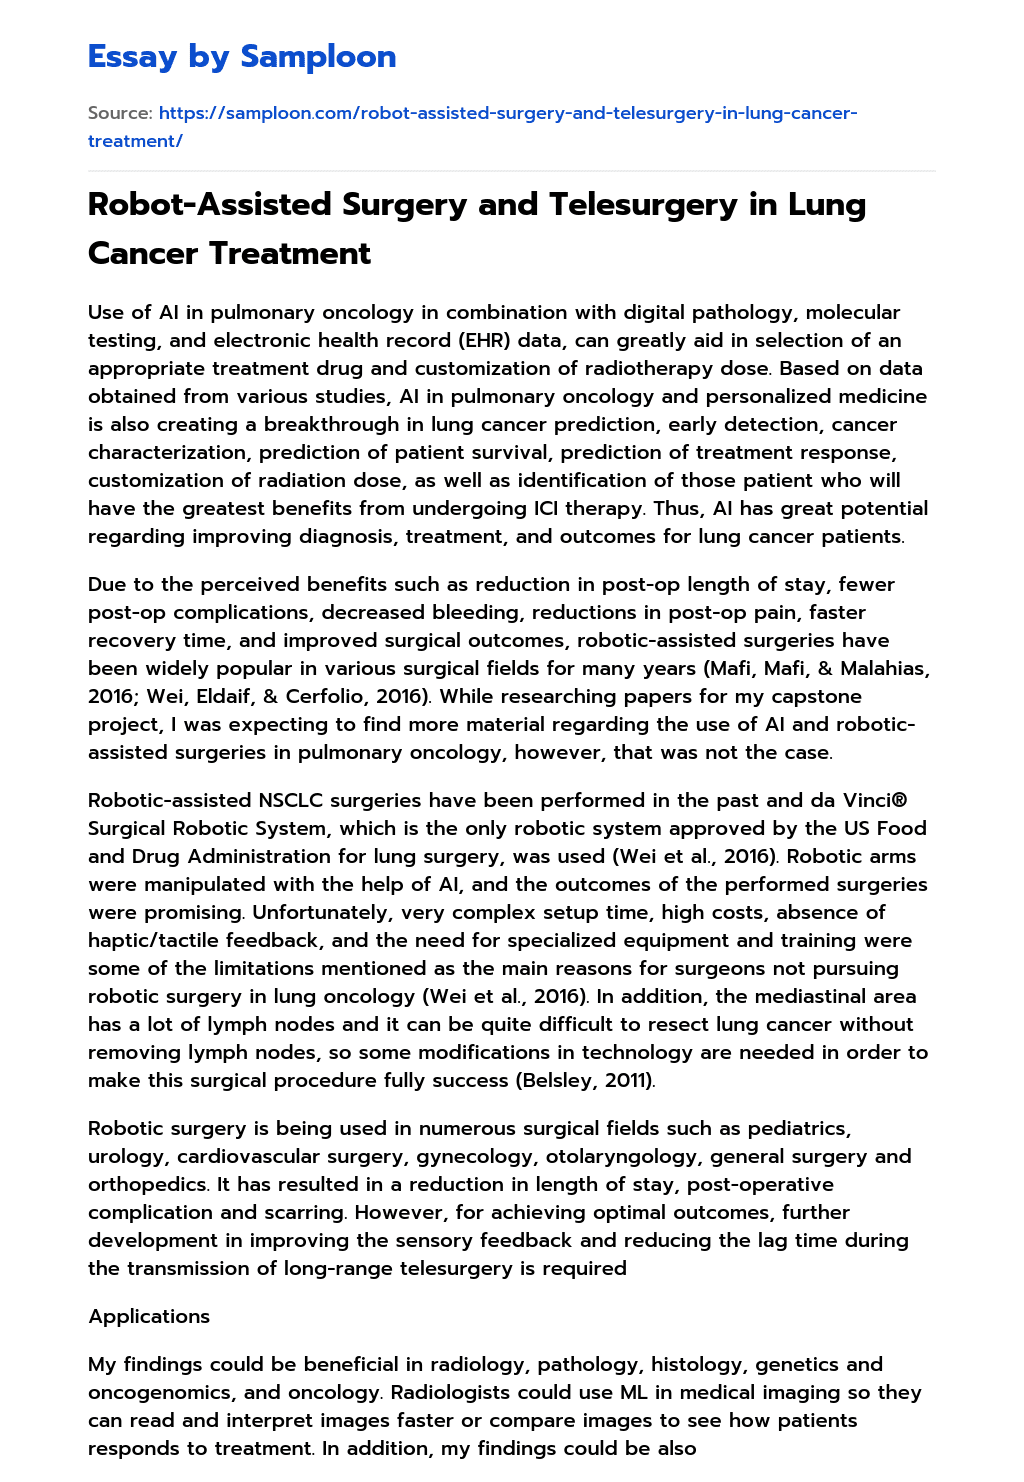 Robot-Assisted Surgery and Telesurgery in Lung Cancer Treatment essay